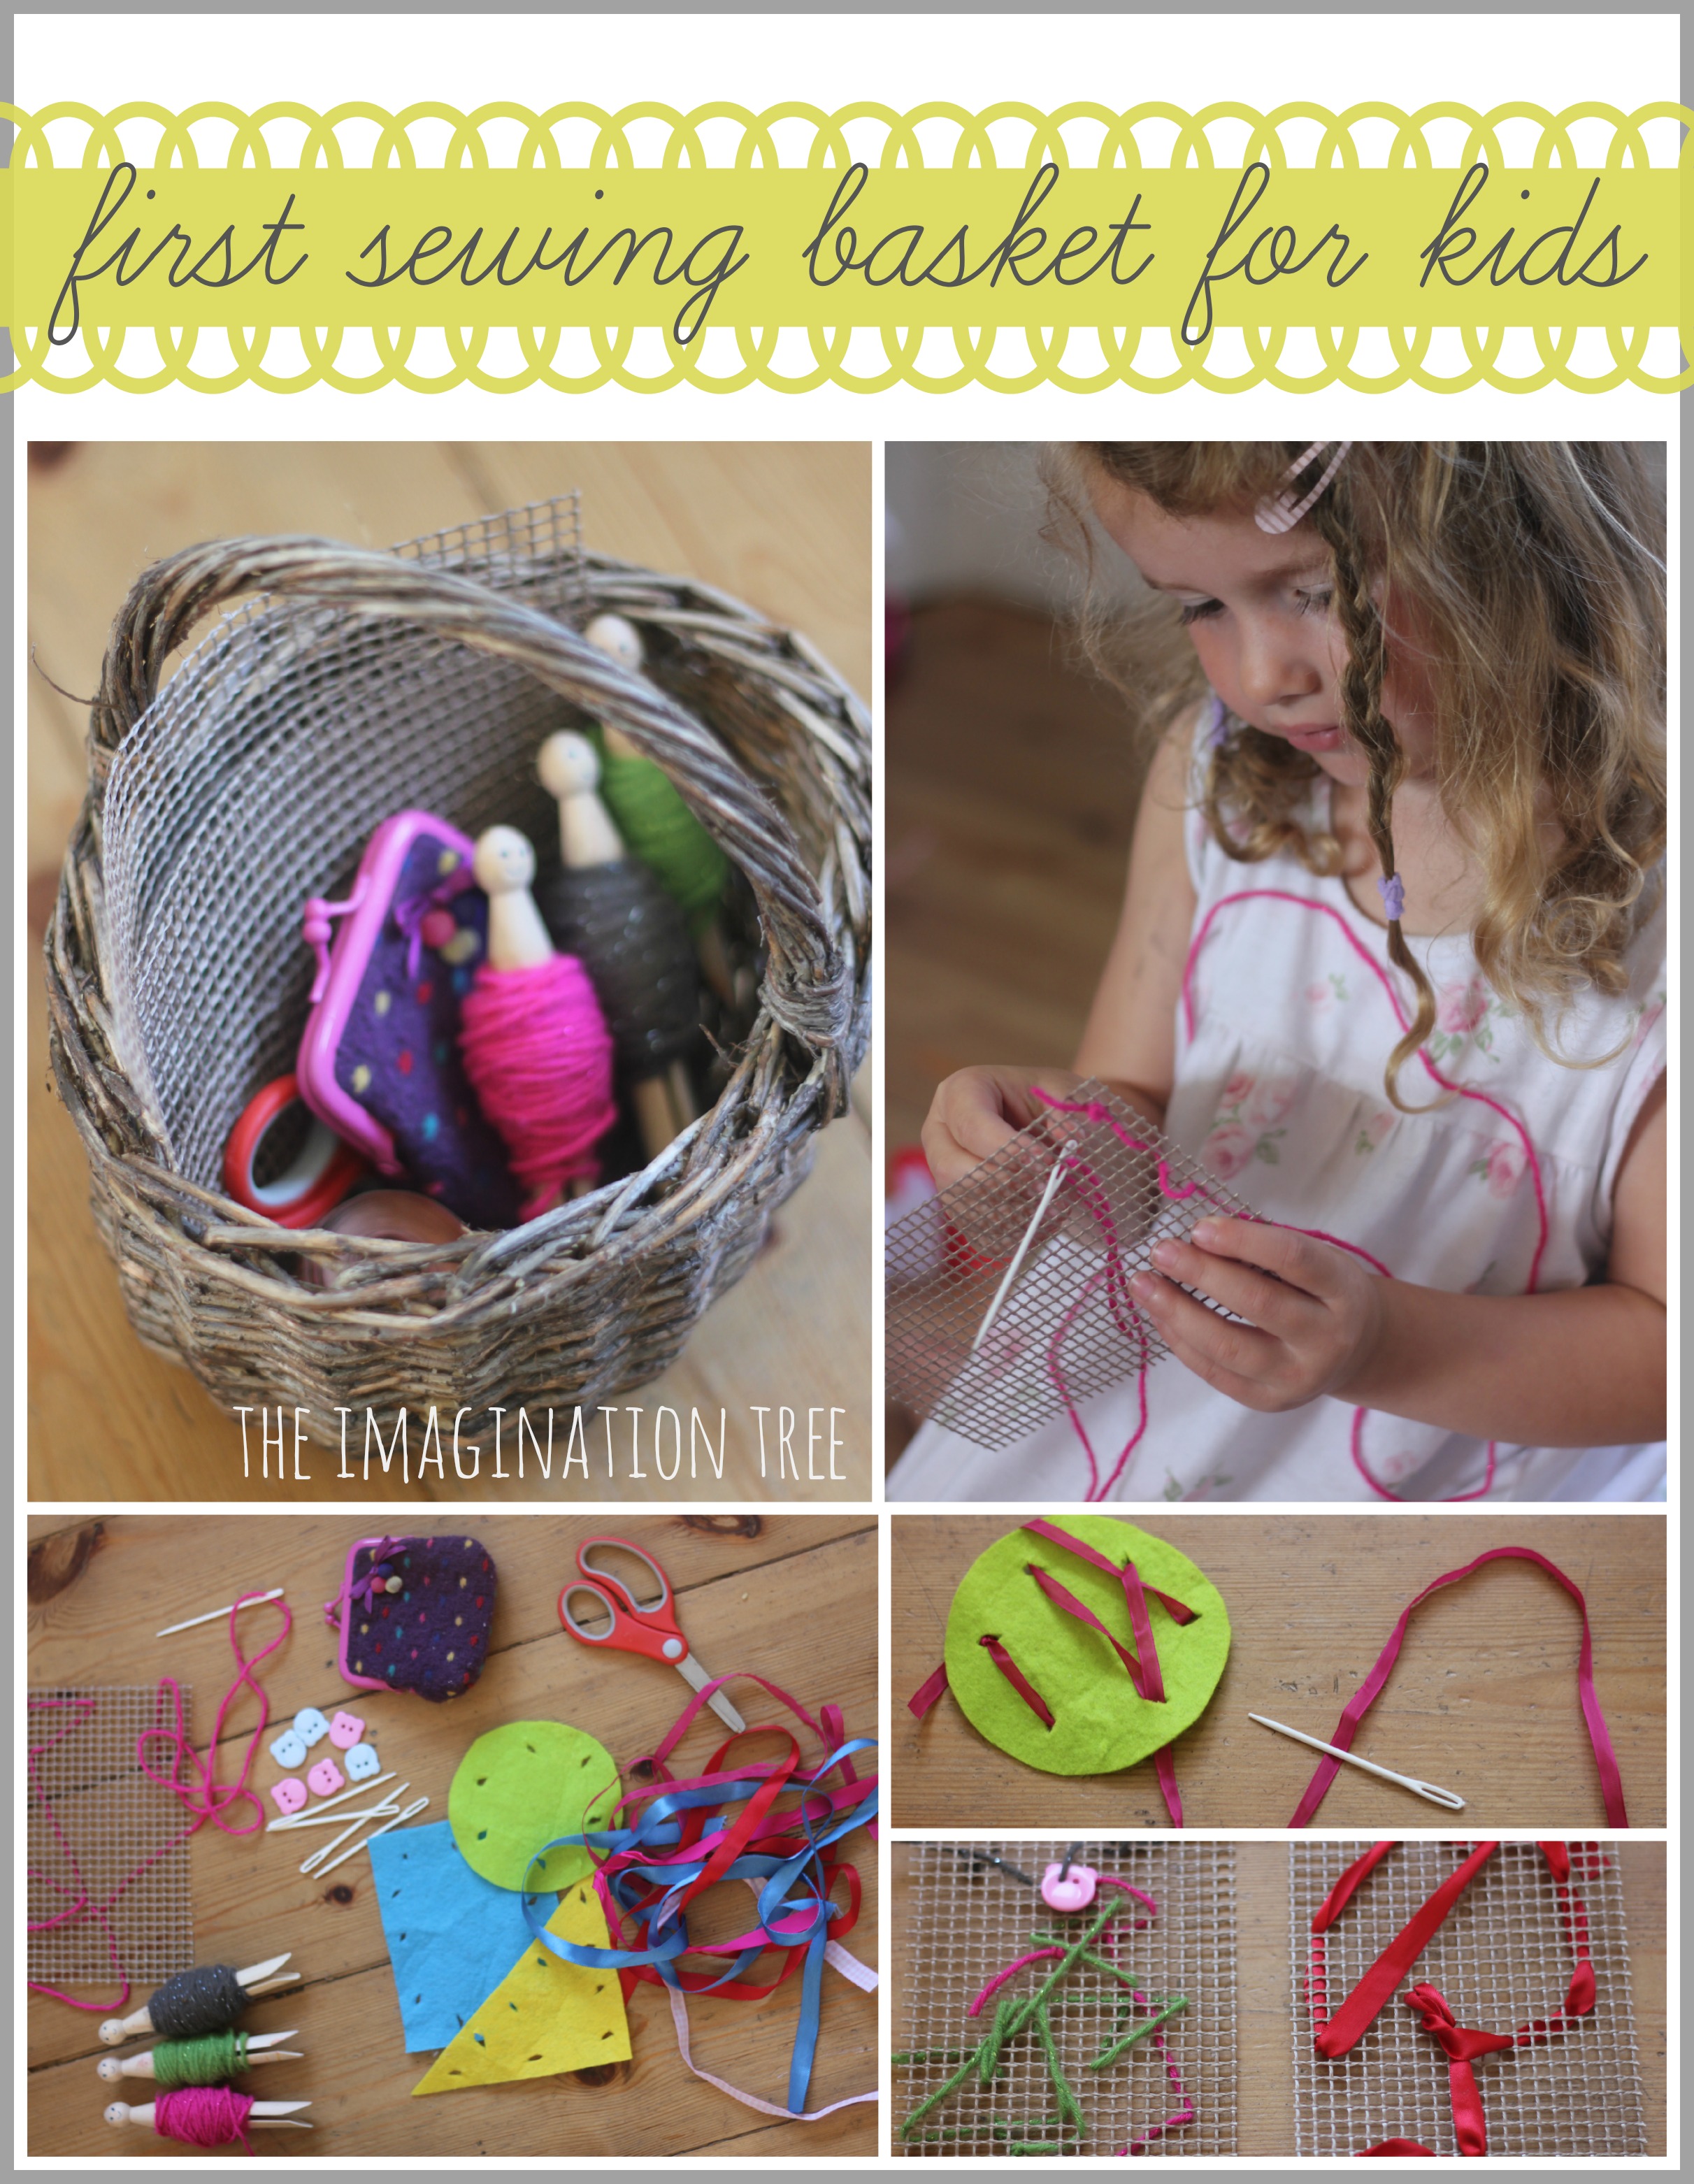 First Sewing Basket for Kids - The Imagination Tree